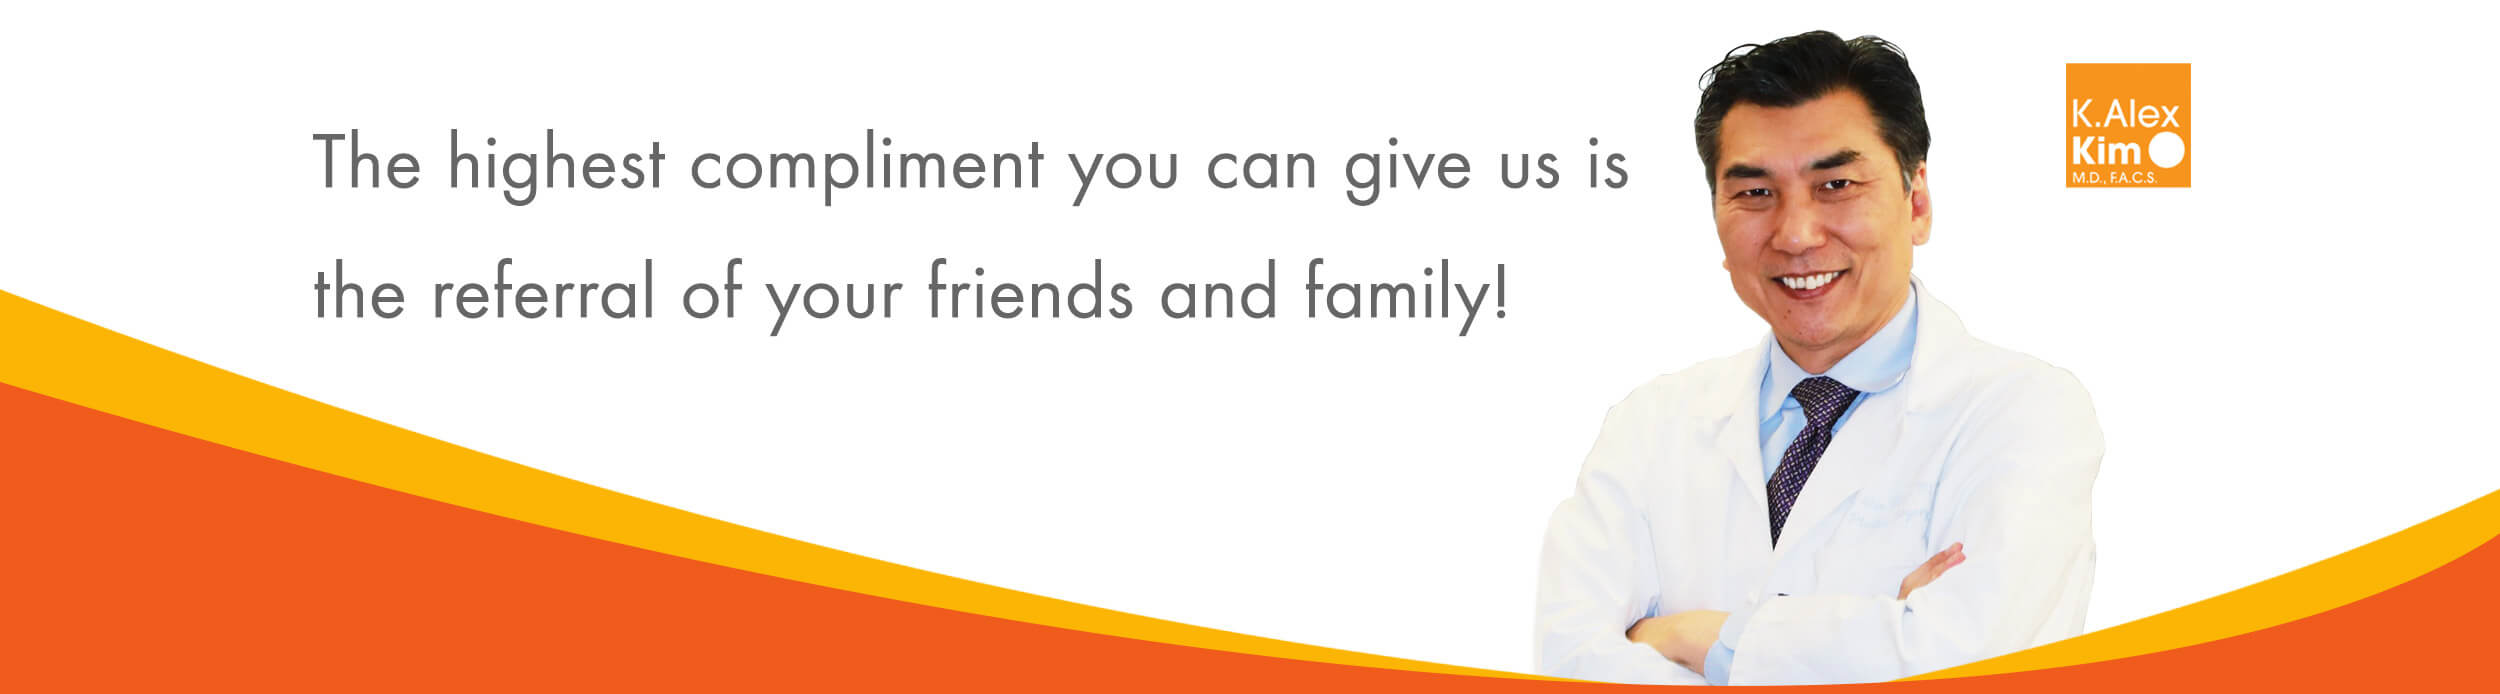 The highest compliment you can give us is the referral of your friends and family!